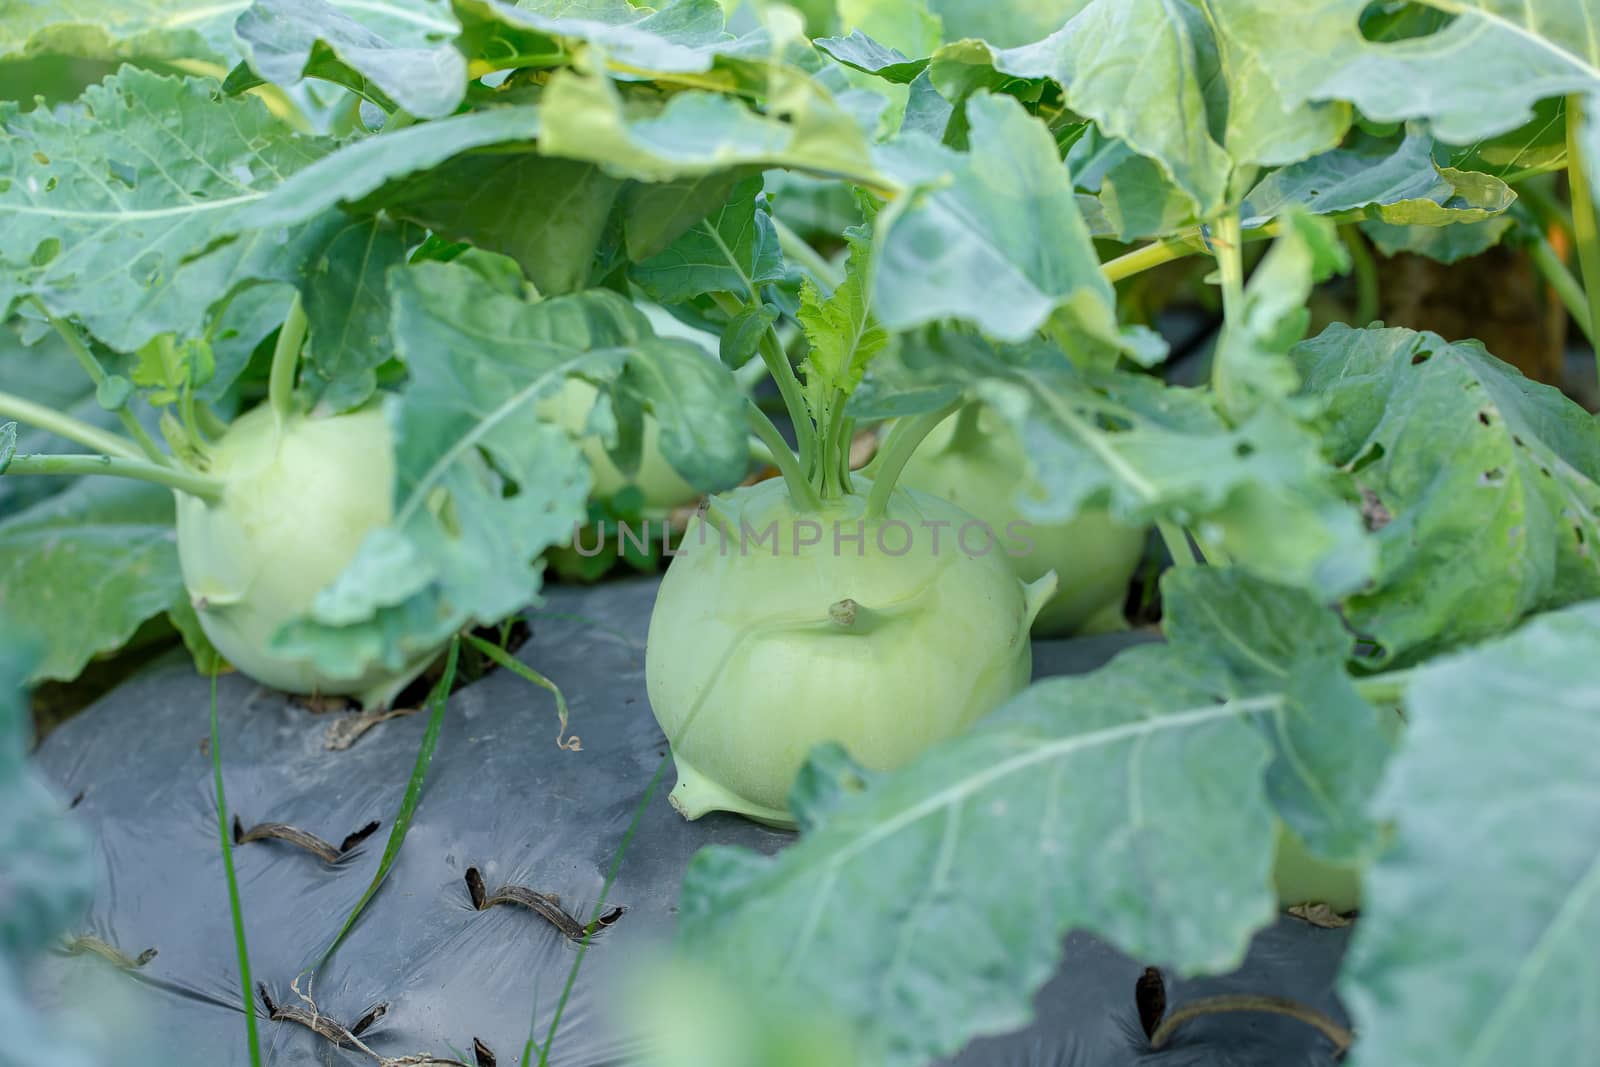 Kohlrabi cabbage or turnip plant growing in the garden by kaiskynet